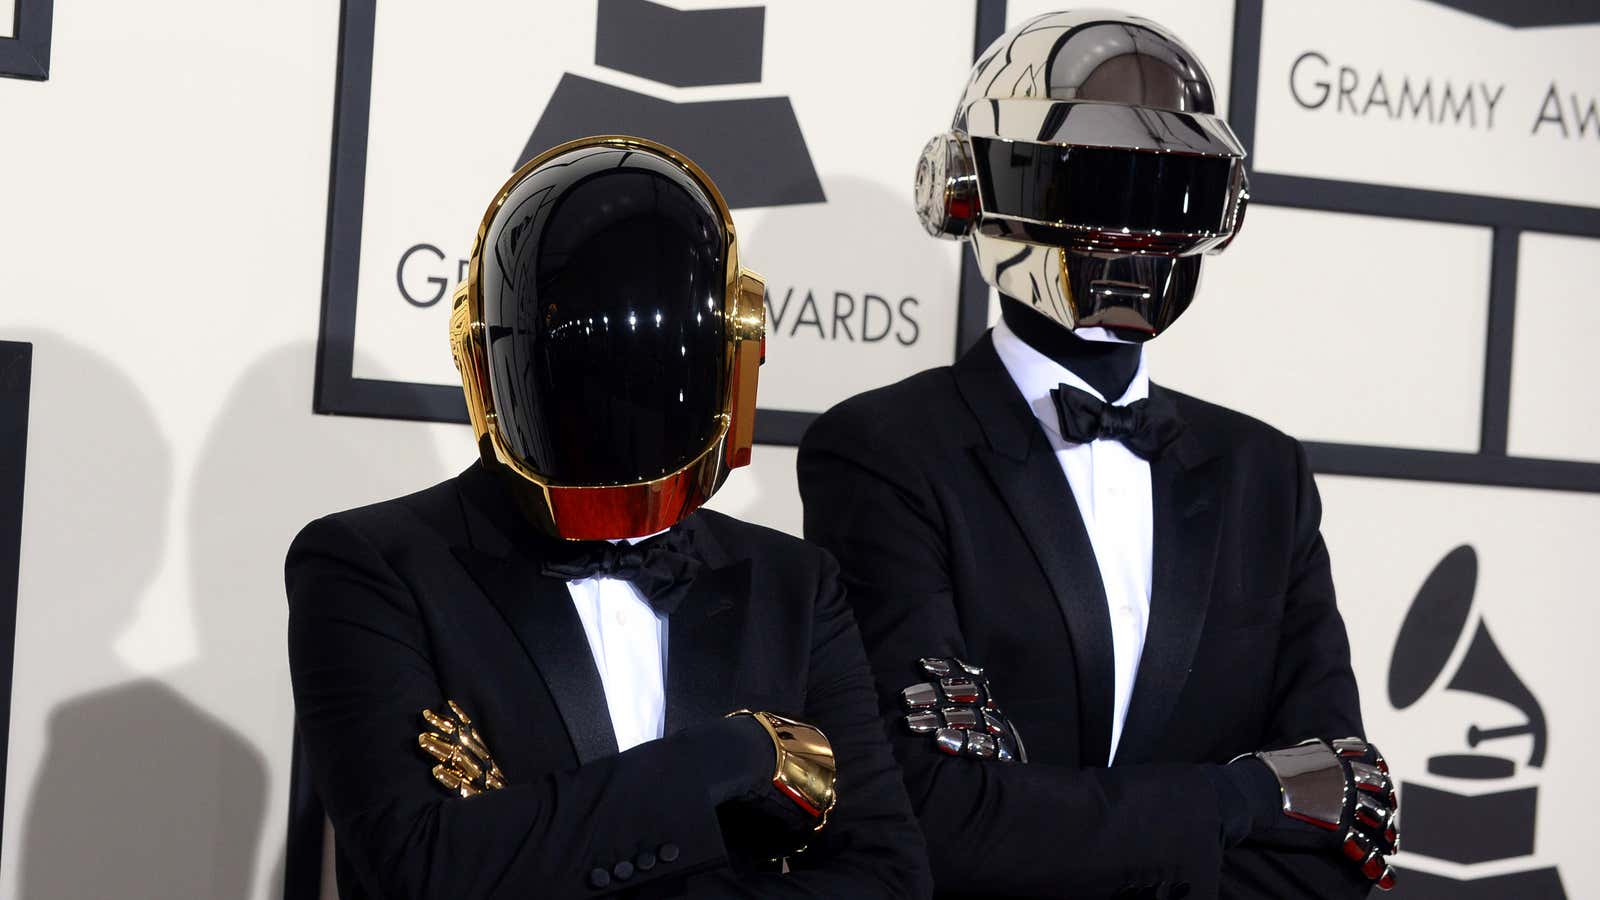 Daft Punk doesn’t count.